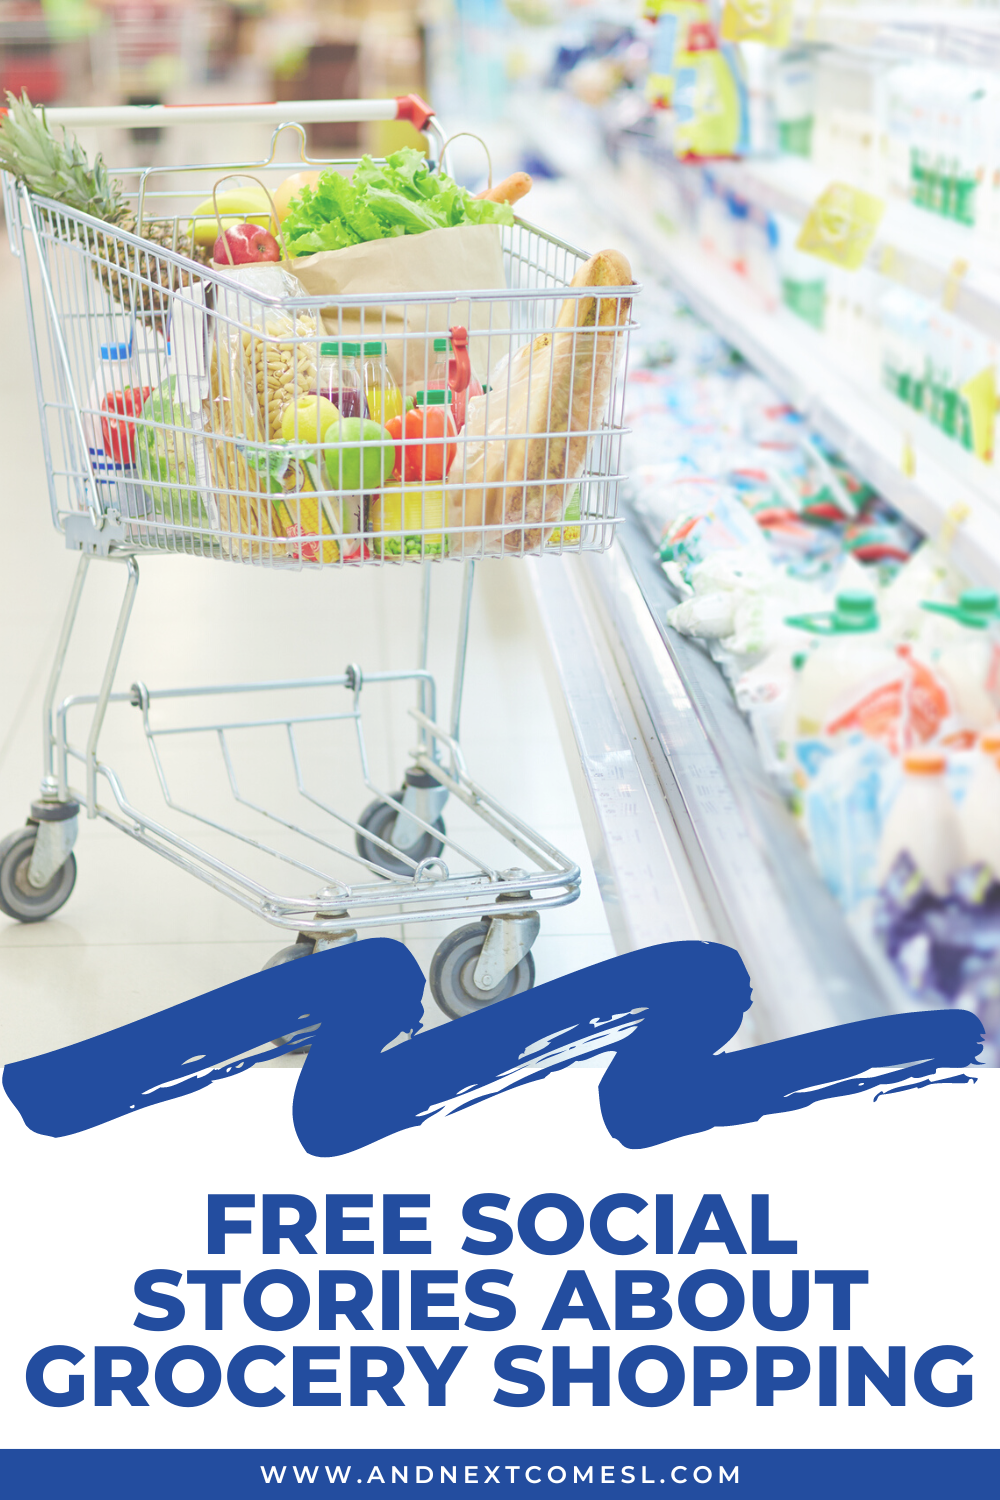 Free social stories about grocery shopping for kids, teens, and adults